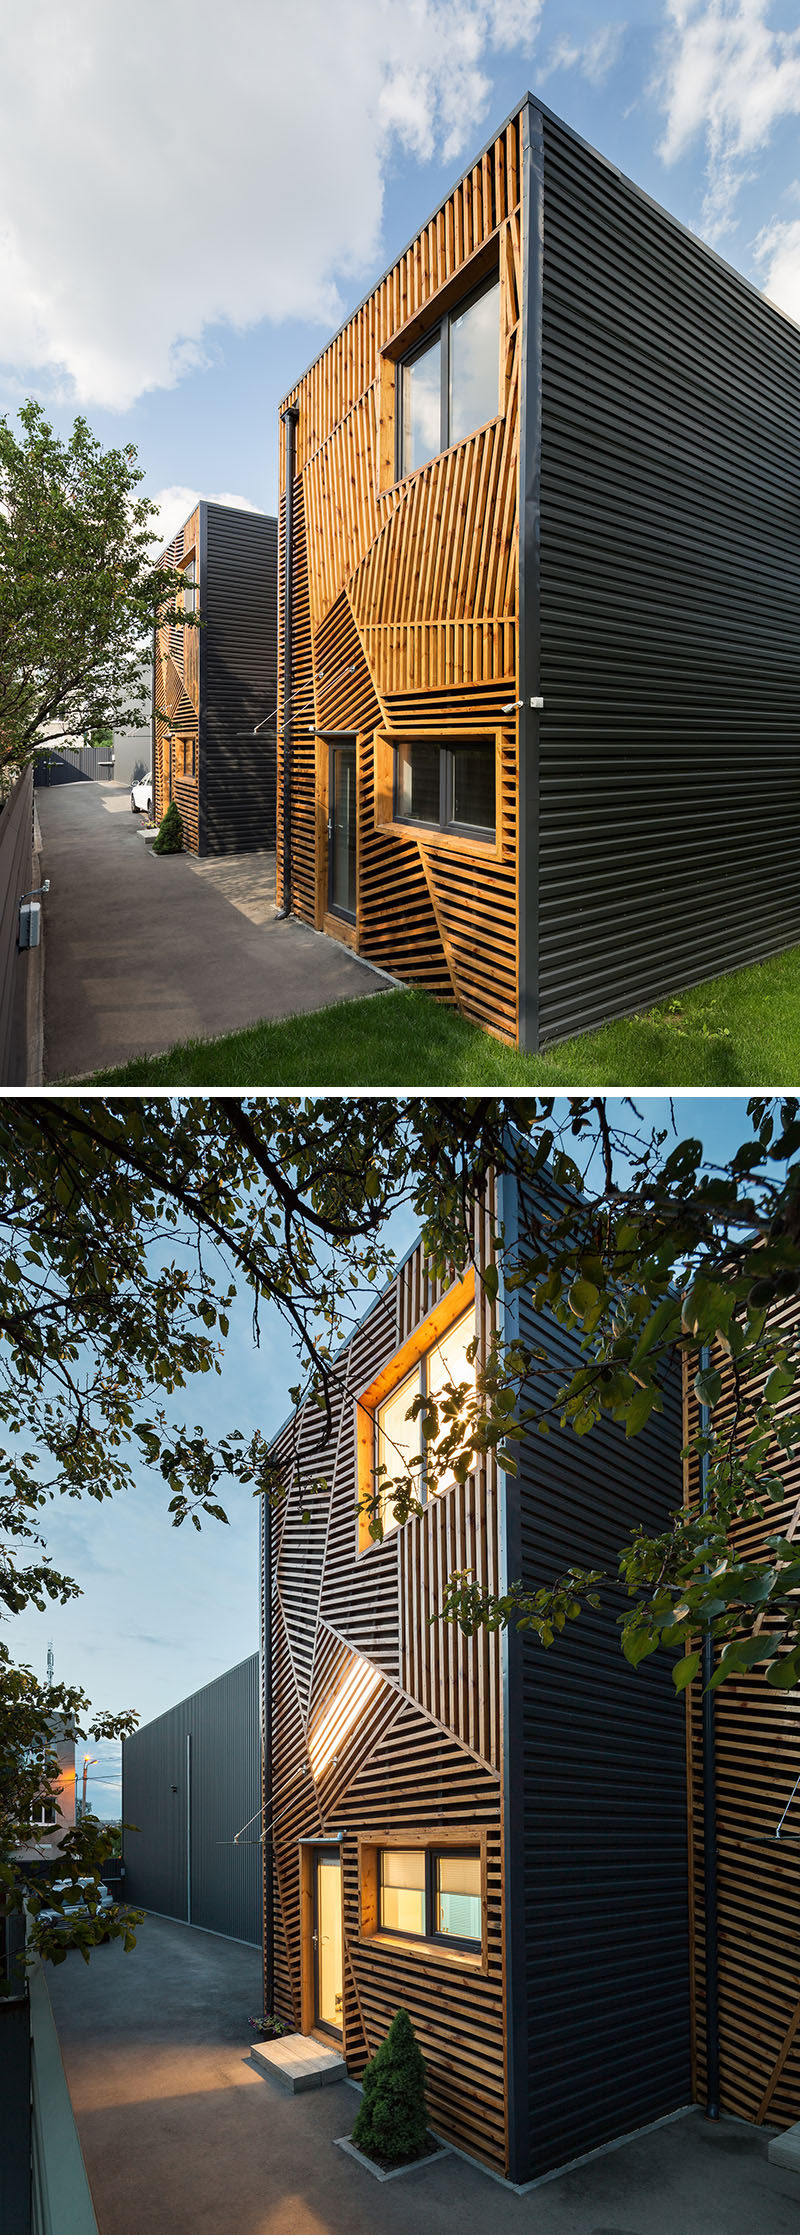 When Pominchuk Architects were designing these townhouses in Kharkiv, Ukraine, they decided to use wooden strips arranged in a geometric design to create a unique facade.